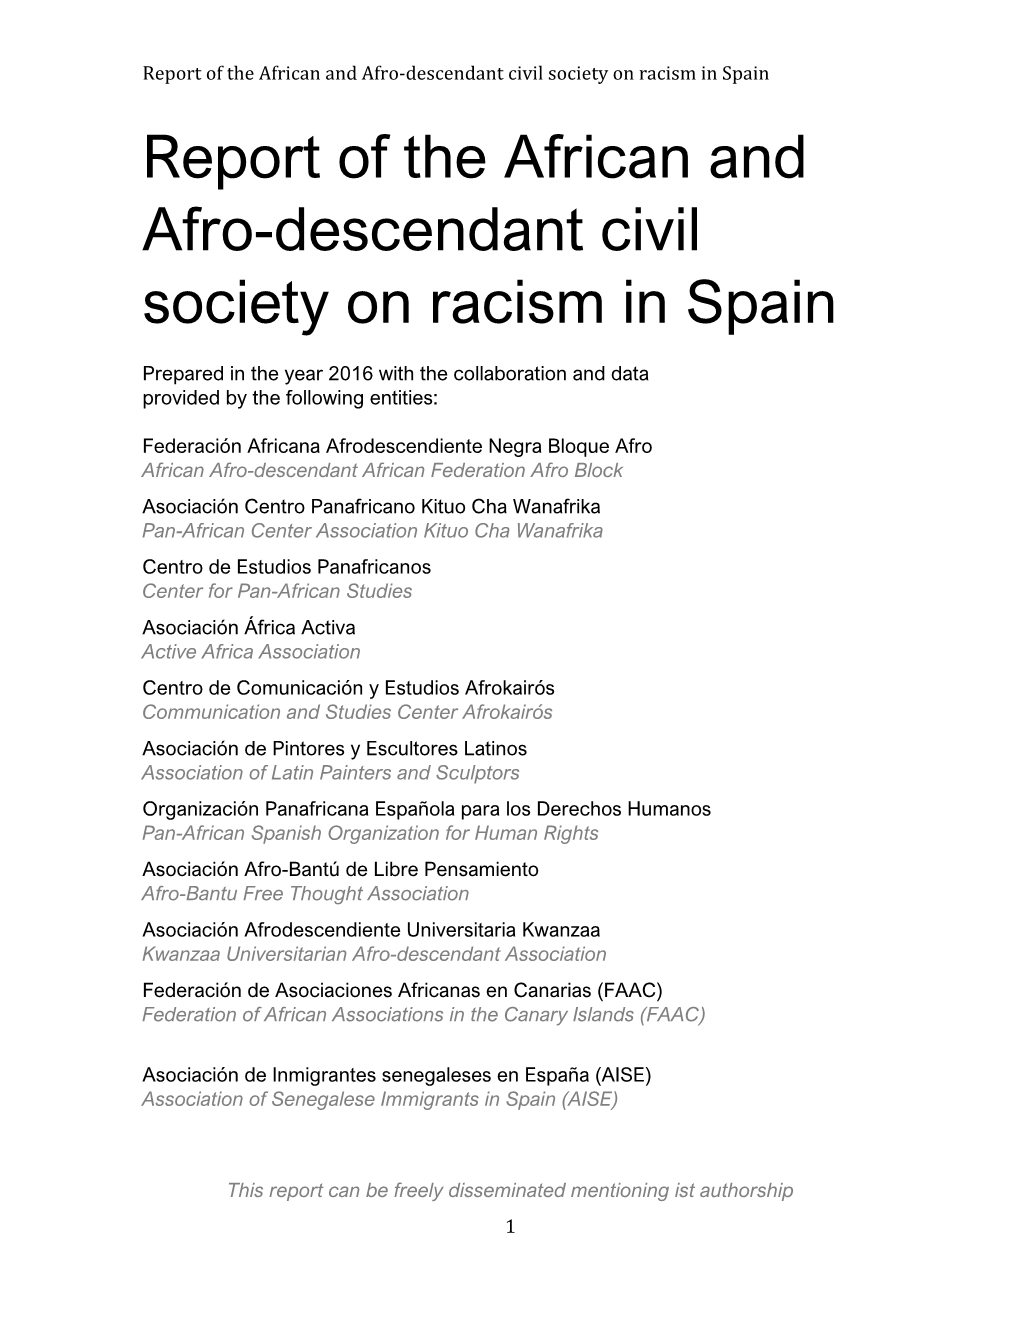 Report of the African and Afro-Descendant Civil Society on Racism in Spain Report of the African and Afro-Descendant Civil Society on Racism in Spain